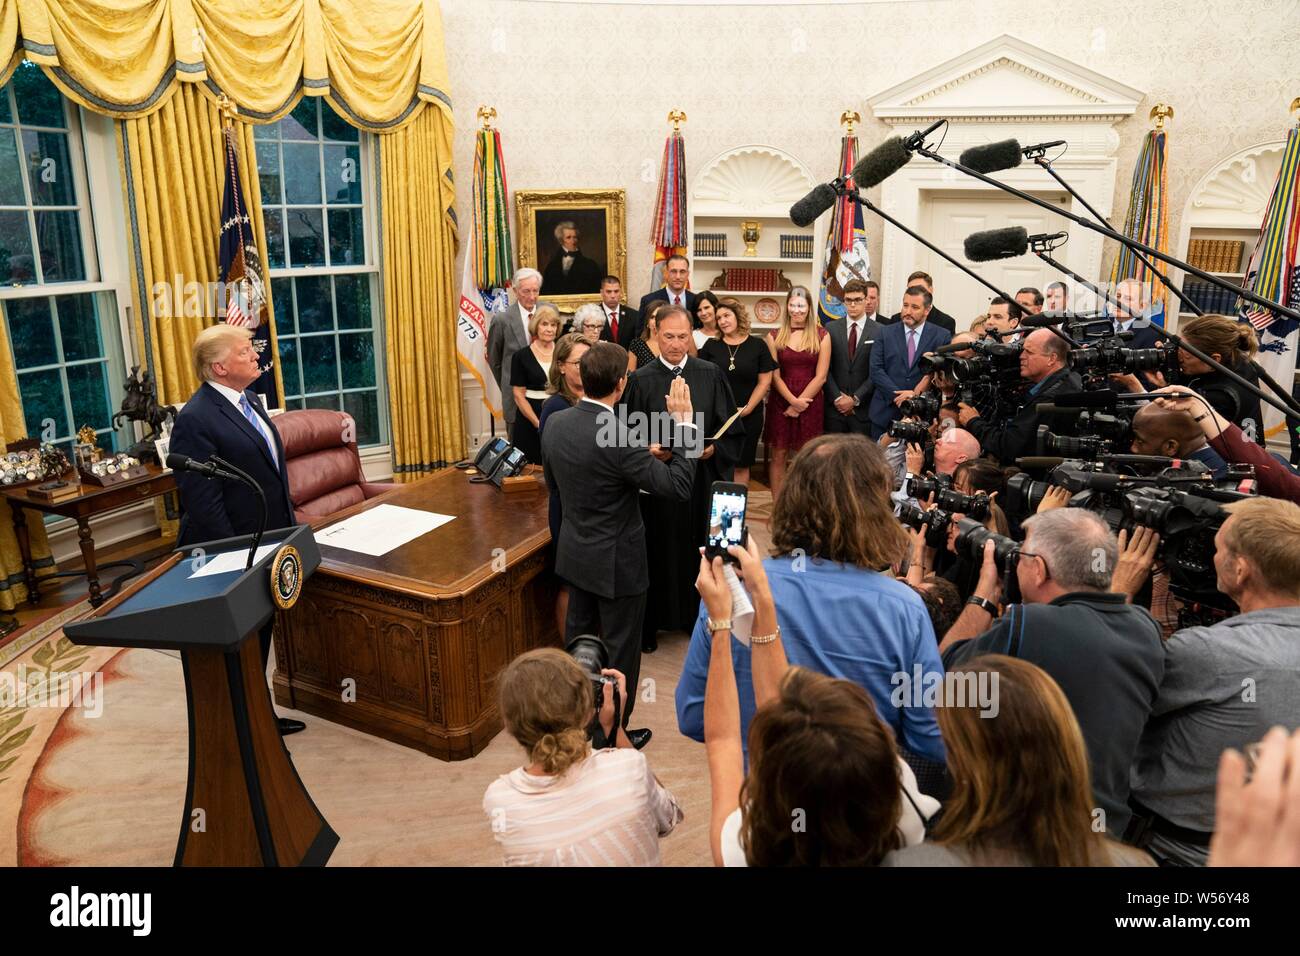 U.S Secretary of Defense Mark Esper, center, takes the oath of office from Supreme Court Associate Justice Samuel Alito as his wife Leah Lacy, center, looks on, during a ceremony in the Oval Office of the White House July 23, 2019 in Washington, DC. Stock Photo